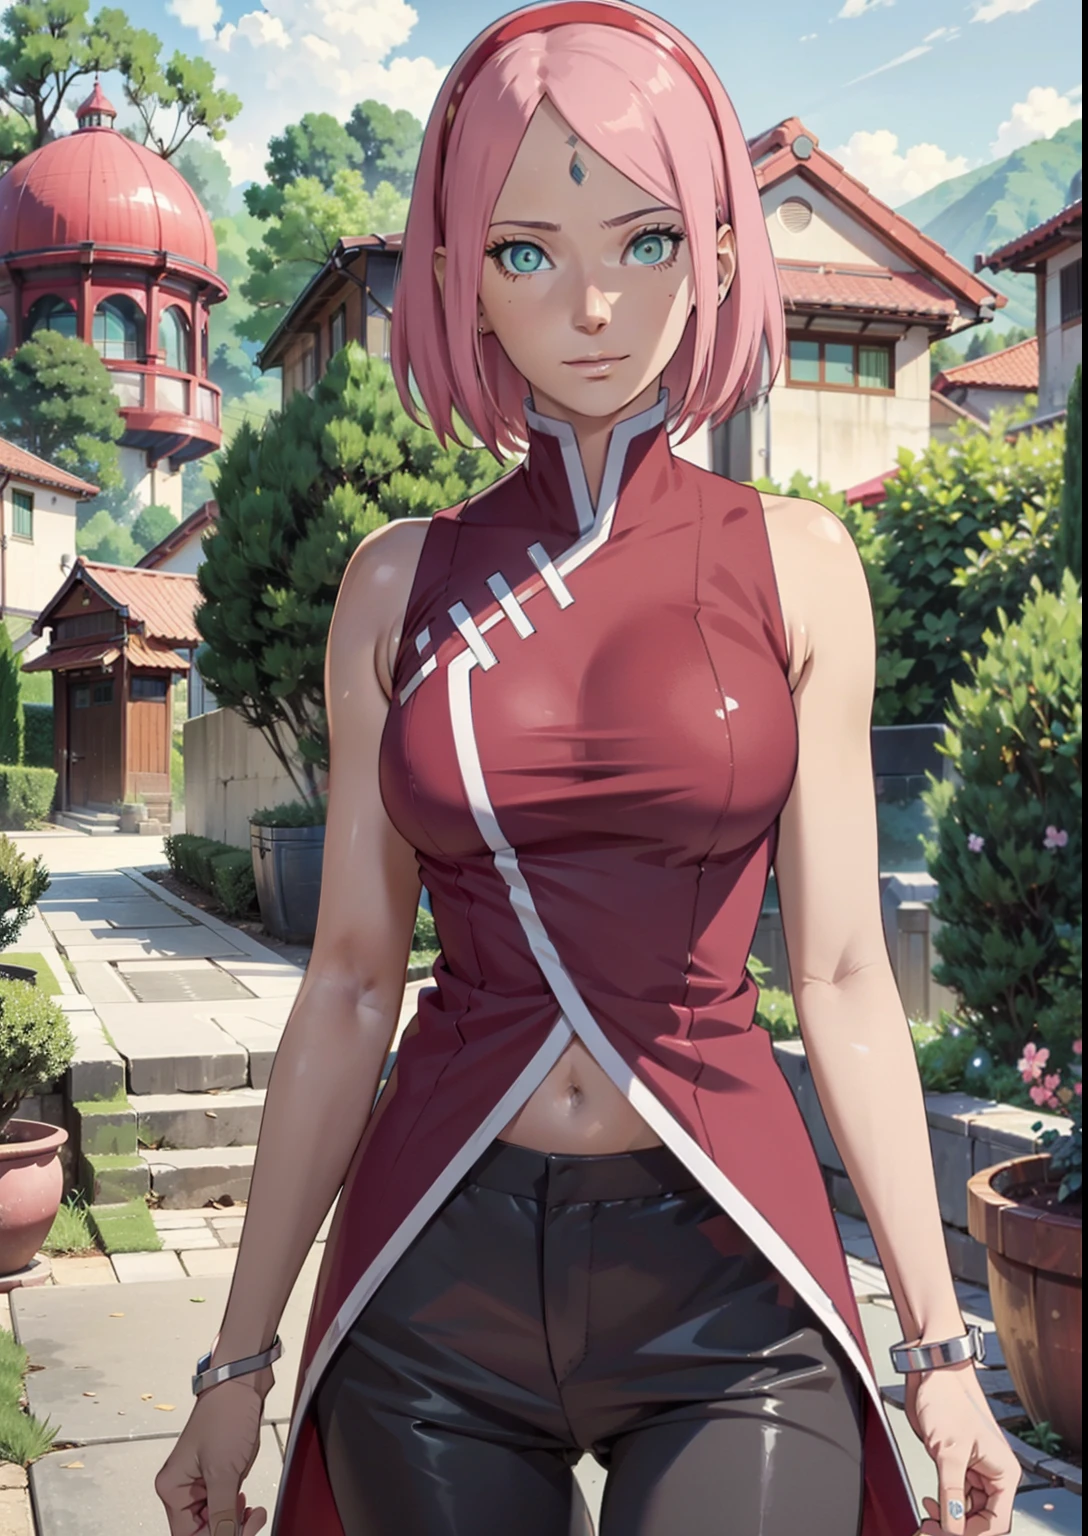 Sakura Haruno,1 rapariga,little breast,Perfect body,a narrow waist,Sexy body,light pink colored hair,Green eyes,symetrical face,Sharpness,foco nítido,extremely detailed outfits,Cute smile,looking at viewert,pause,erect through,Beautiful garden in the background,Deep blue diamond on forehead,black glove,redhairband,Red sweatpants,White and red tight vest,Sleeveless,Shorten the vest,full bodyesbian,full-body portraits,